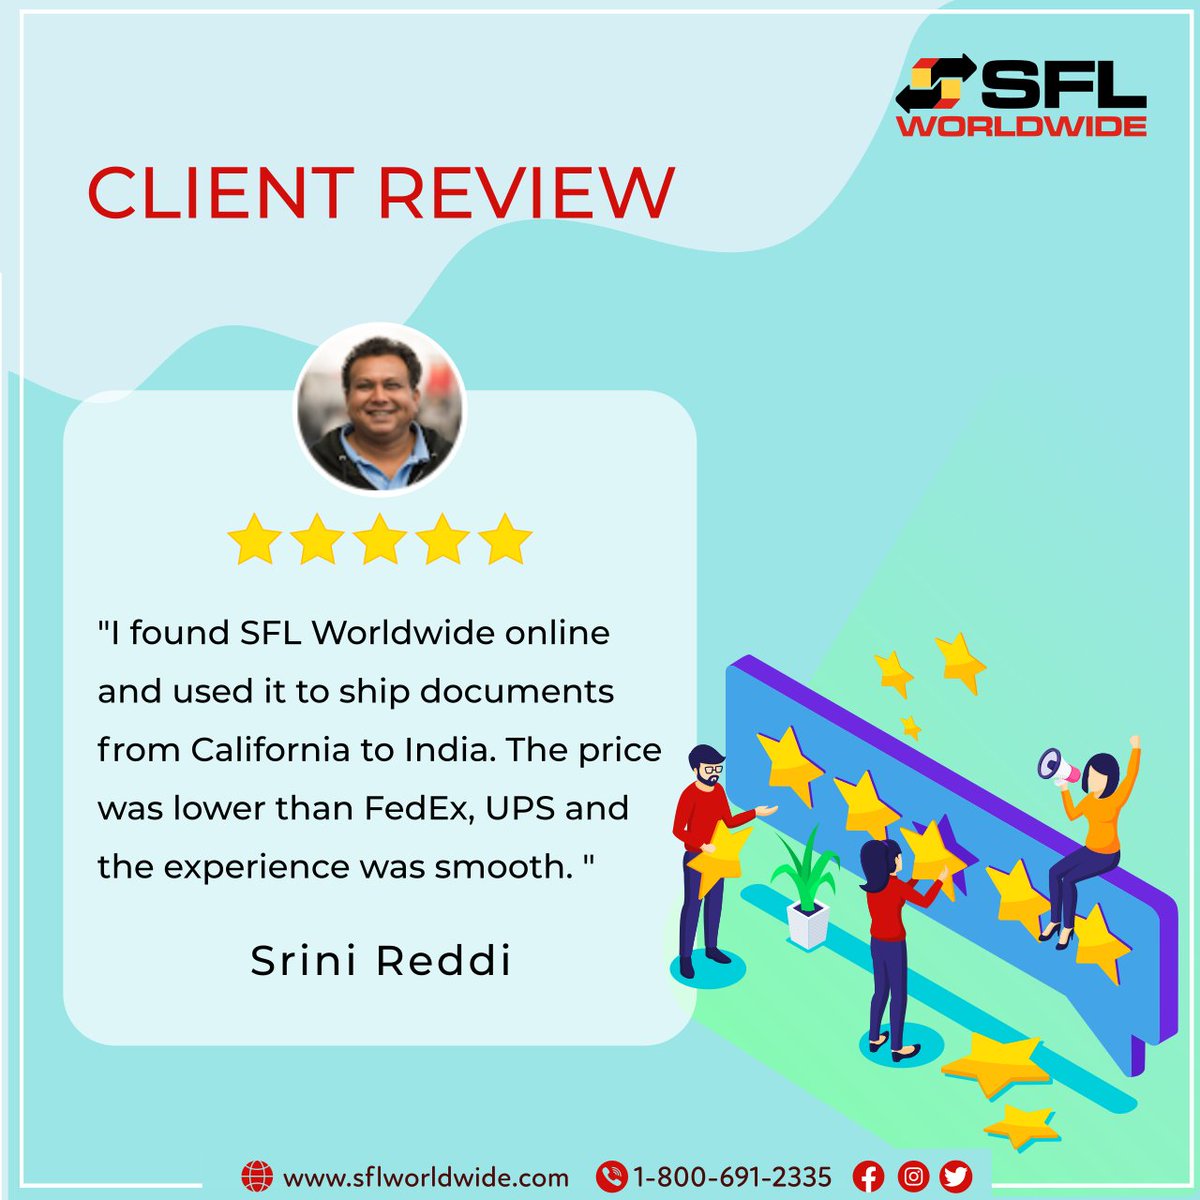 Our customers are our top priority! Check out this testimonial from a satisfied customer who trusted us with their shipping needs. Thank you for choosing us! 🙌🚛📦 #SFLWorldwide #CustomerTestimonial #CustomerSatisfaction #ShippingCompany